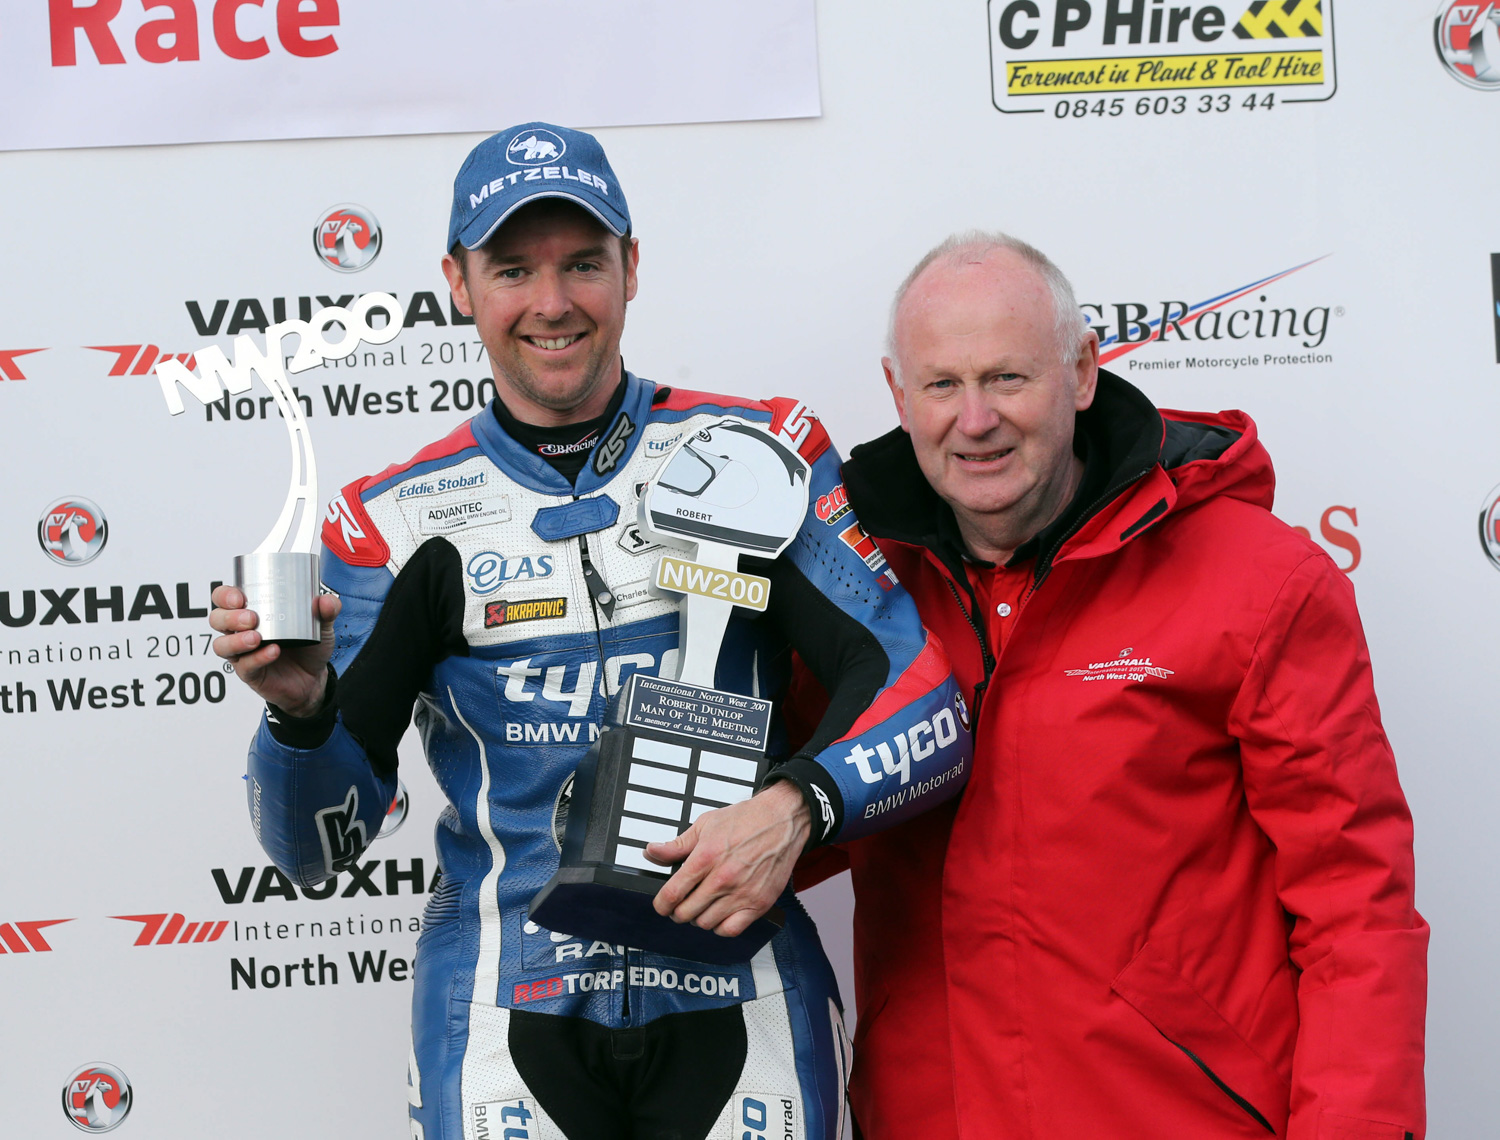 PACEMAKER BELFAST 13/05/2016 Alastair Seeley is presented with his Man of the Meeting trophy by Race Director Mervyn Whyte MBE at todays Vauxhall International North West 200. Photo Stephen Davison/Pacemaker Press